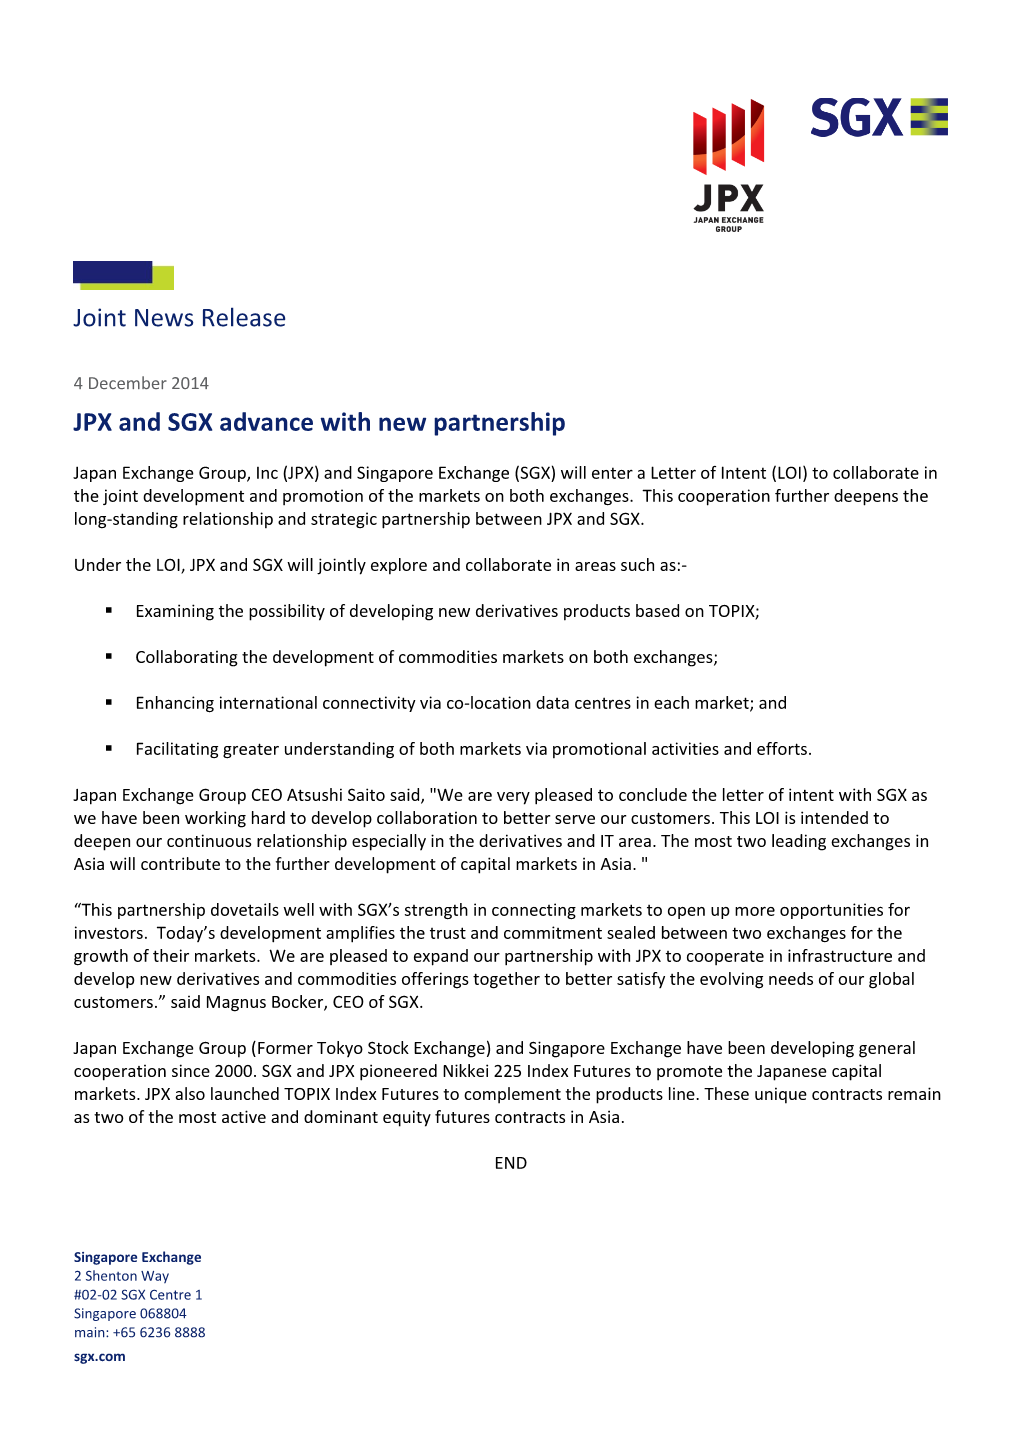 Joint News Release JPX and SGX Advance with New Partnership